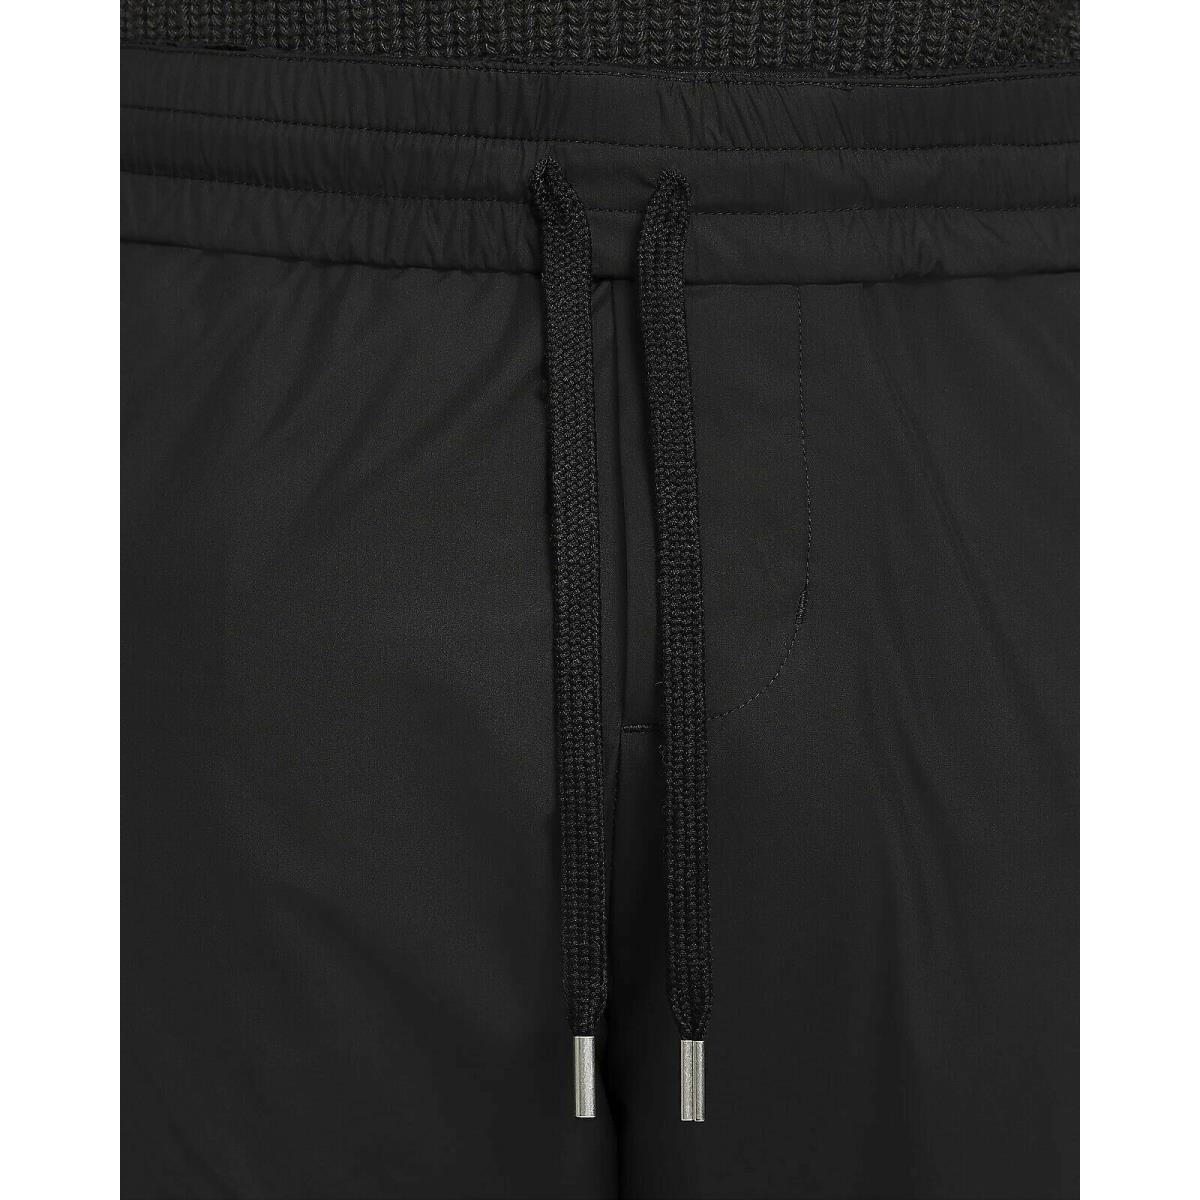 Nike clothing Every Stitch Considered Pants - Black 3